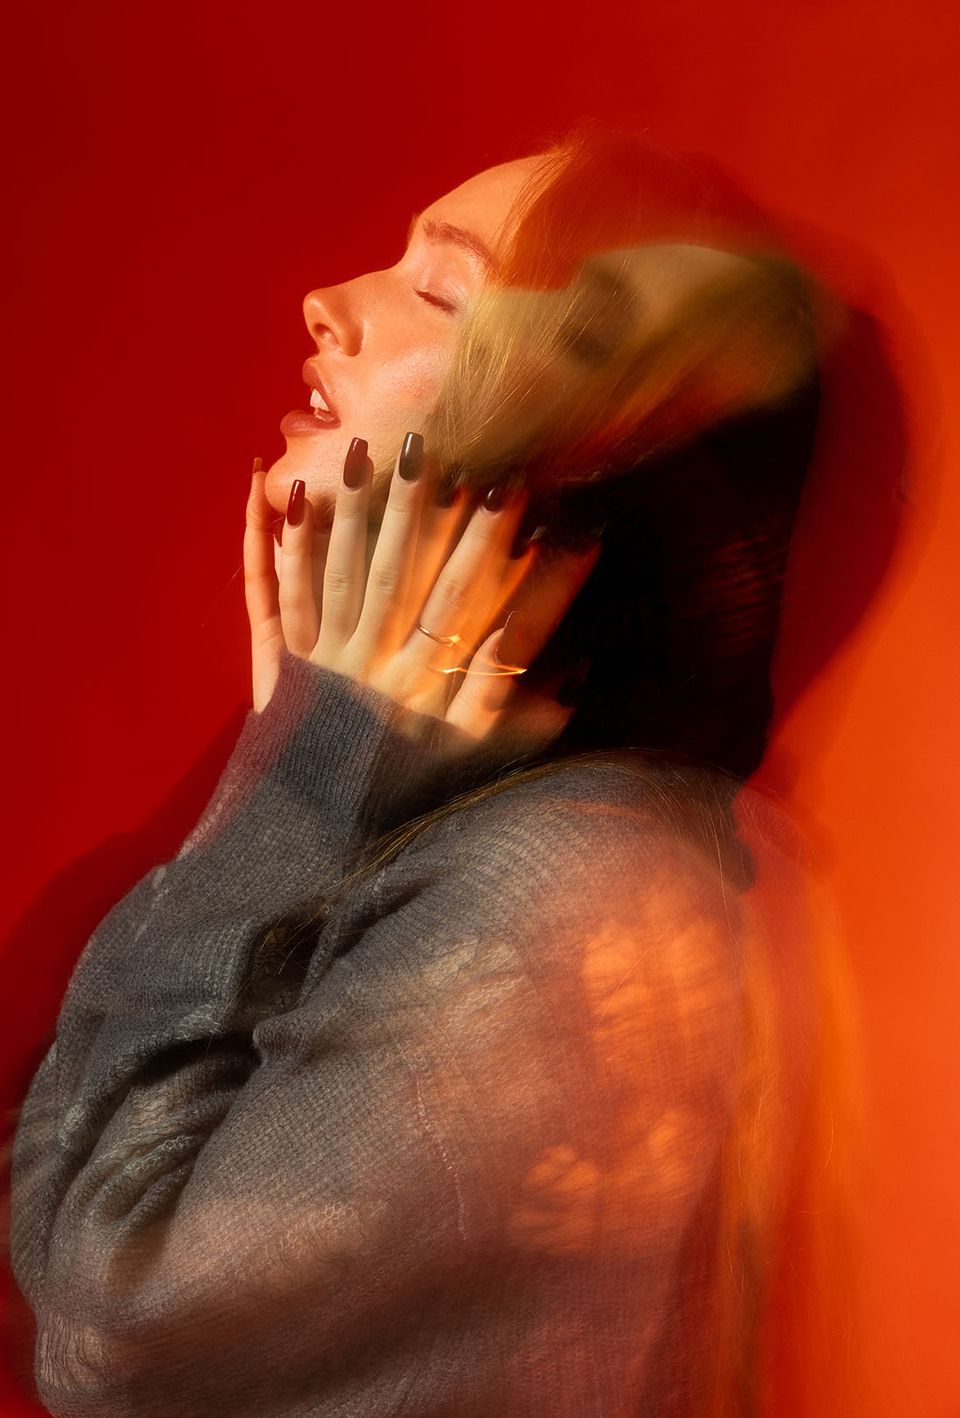 A double exposure of a young woman with eyes closed and lips parted with hands to her face